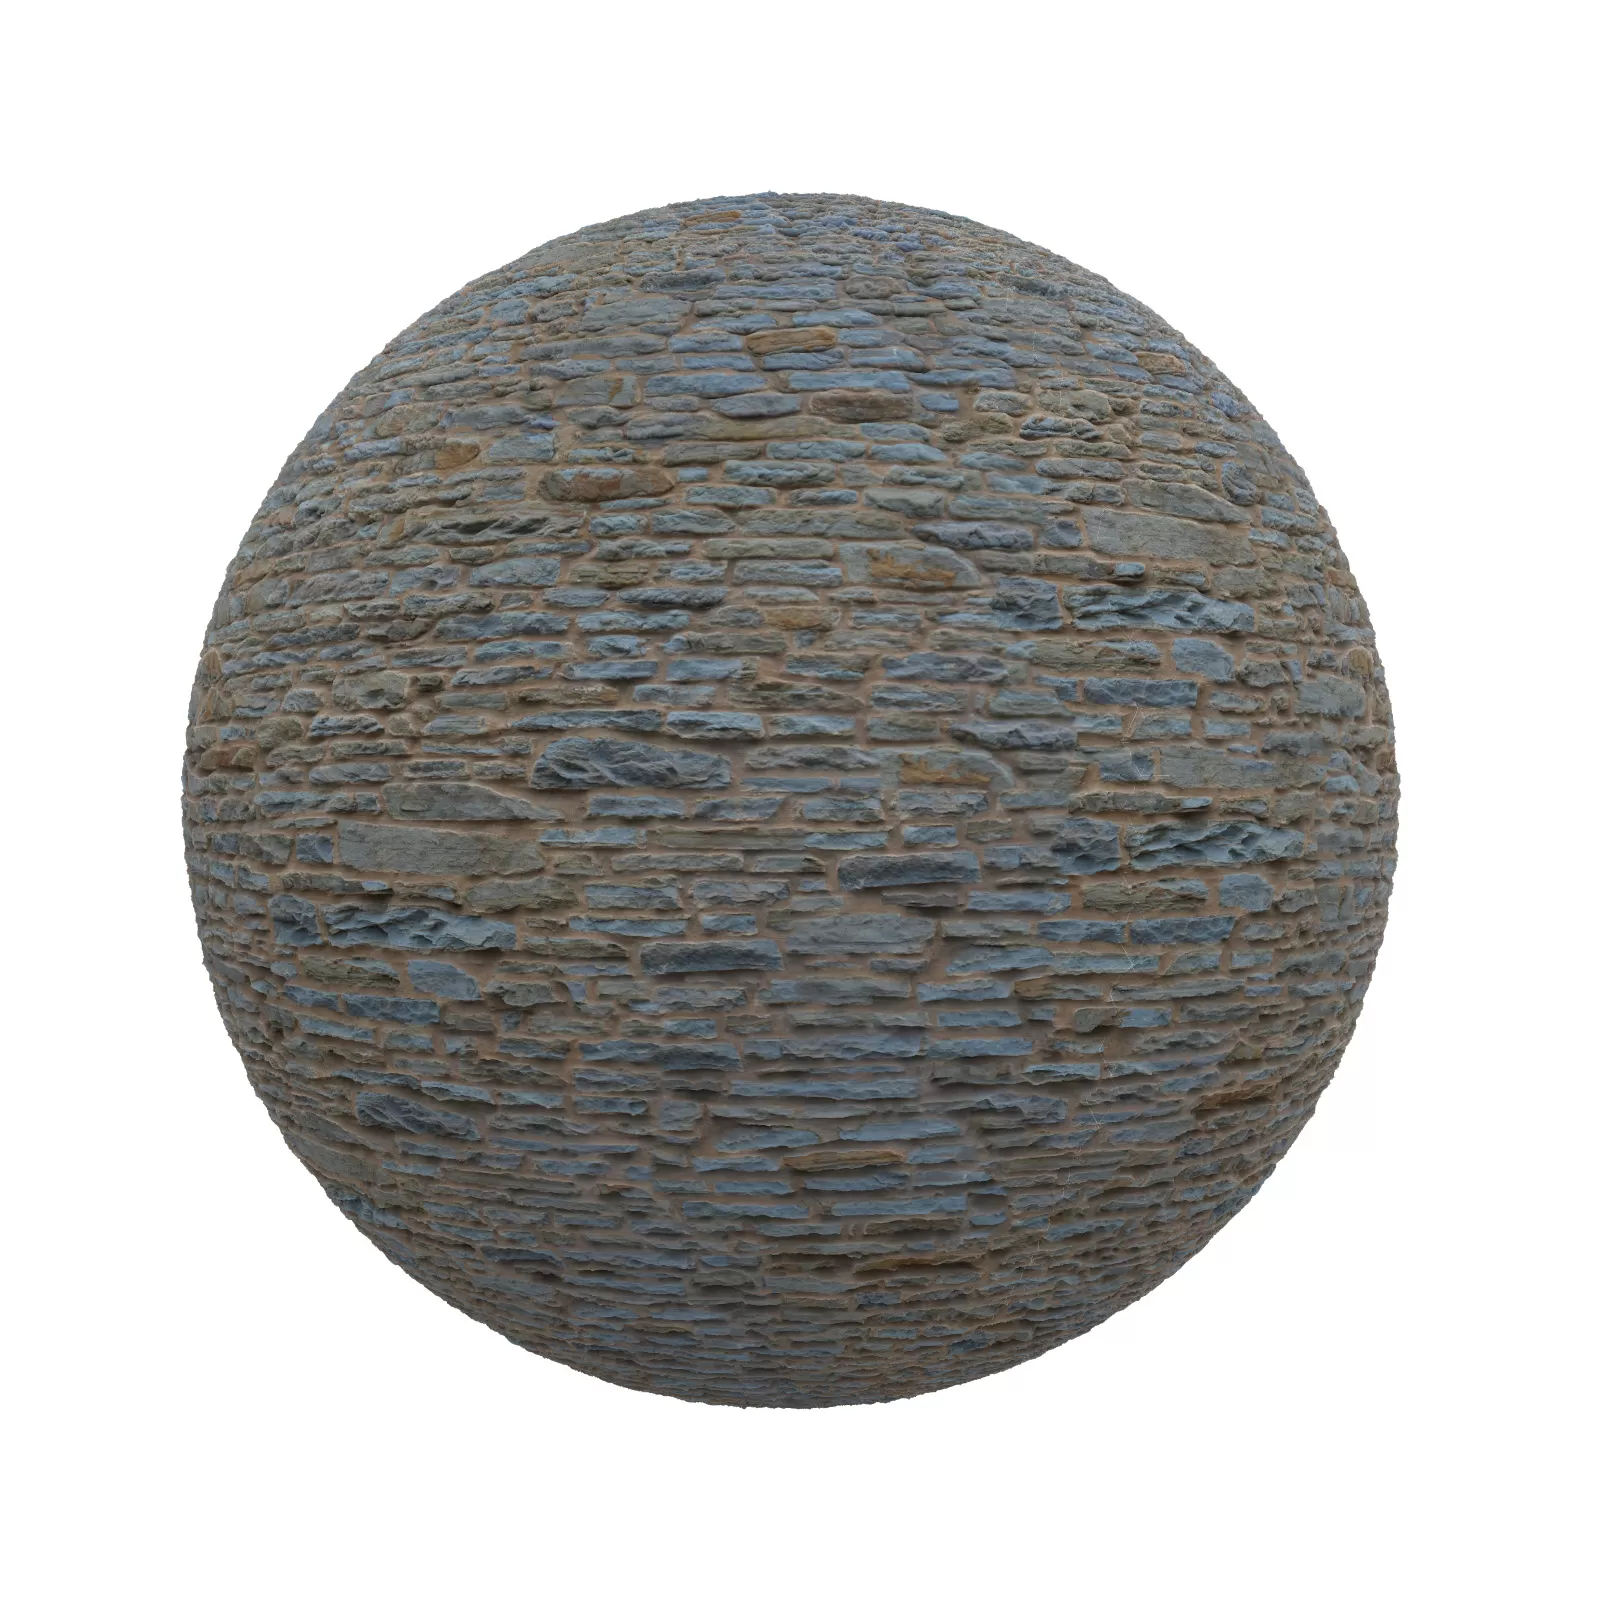 TEXTURES – STONES – CGAxis PBR Colection Vol 1 Stones – stone brick wall 2